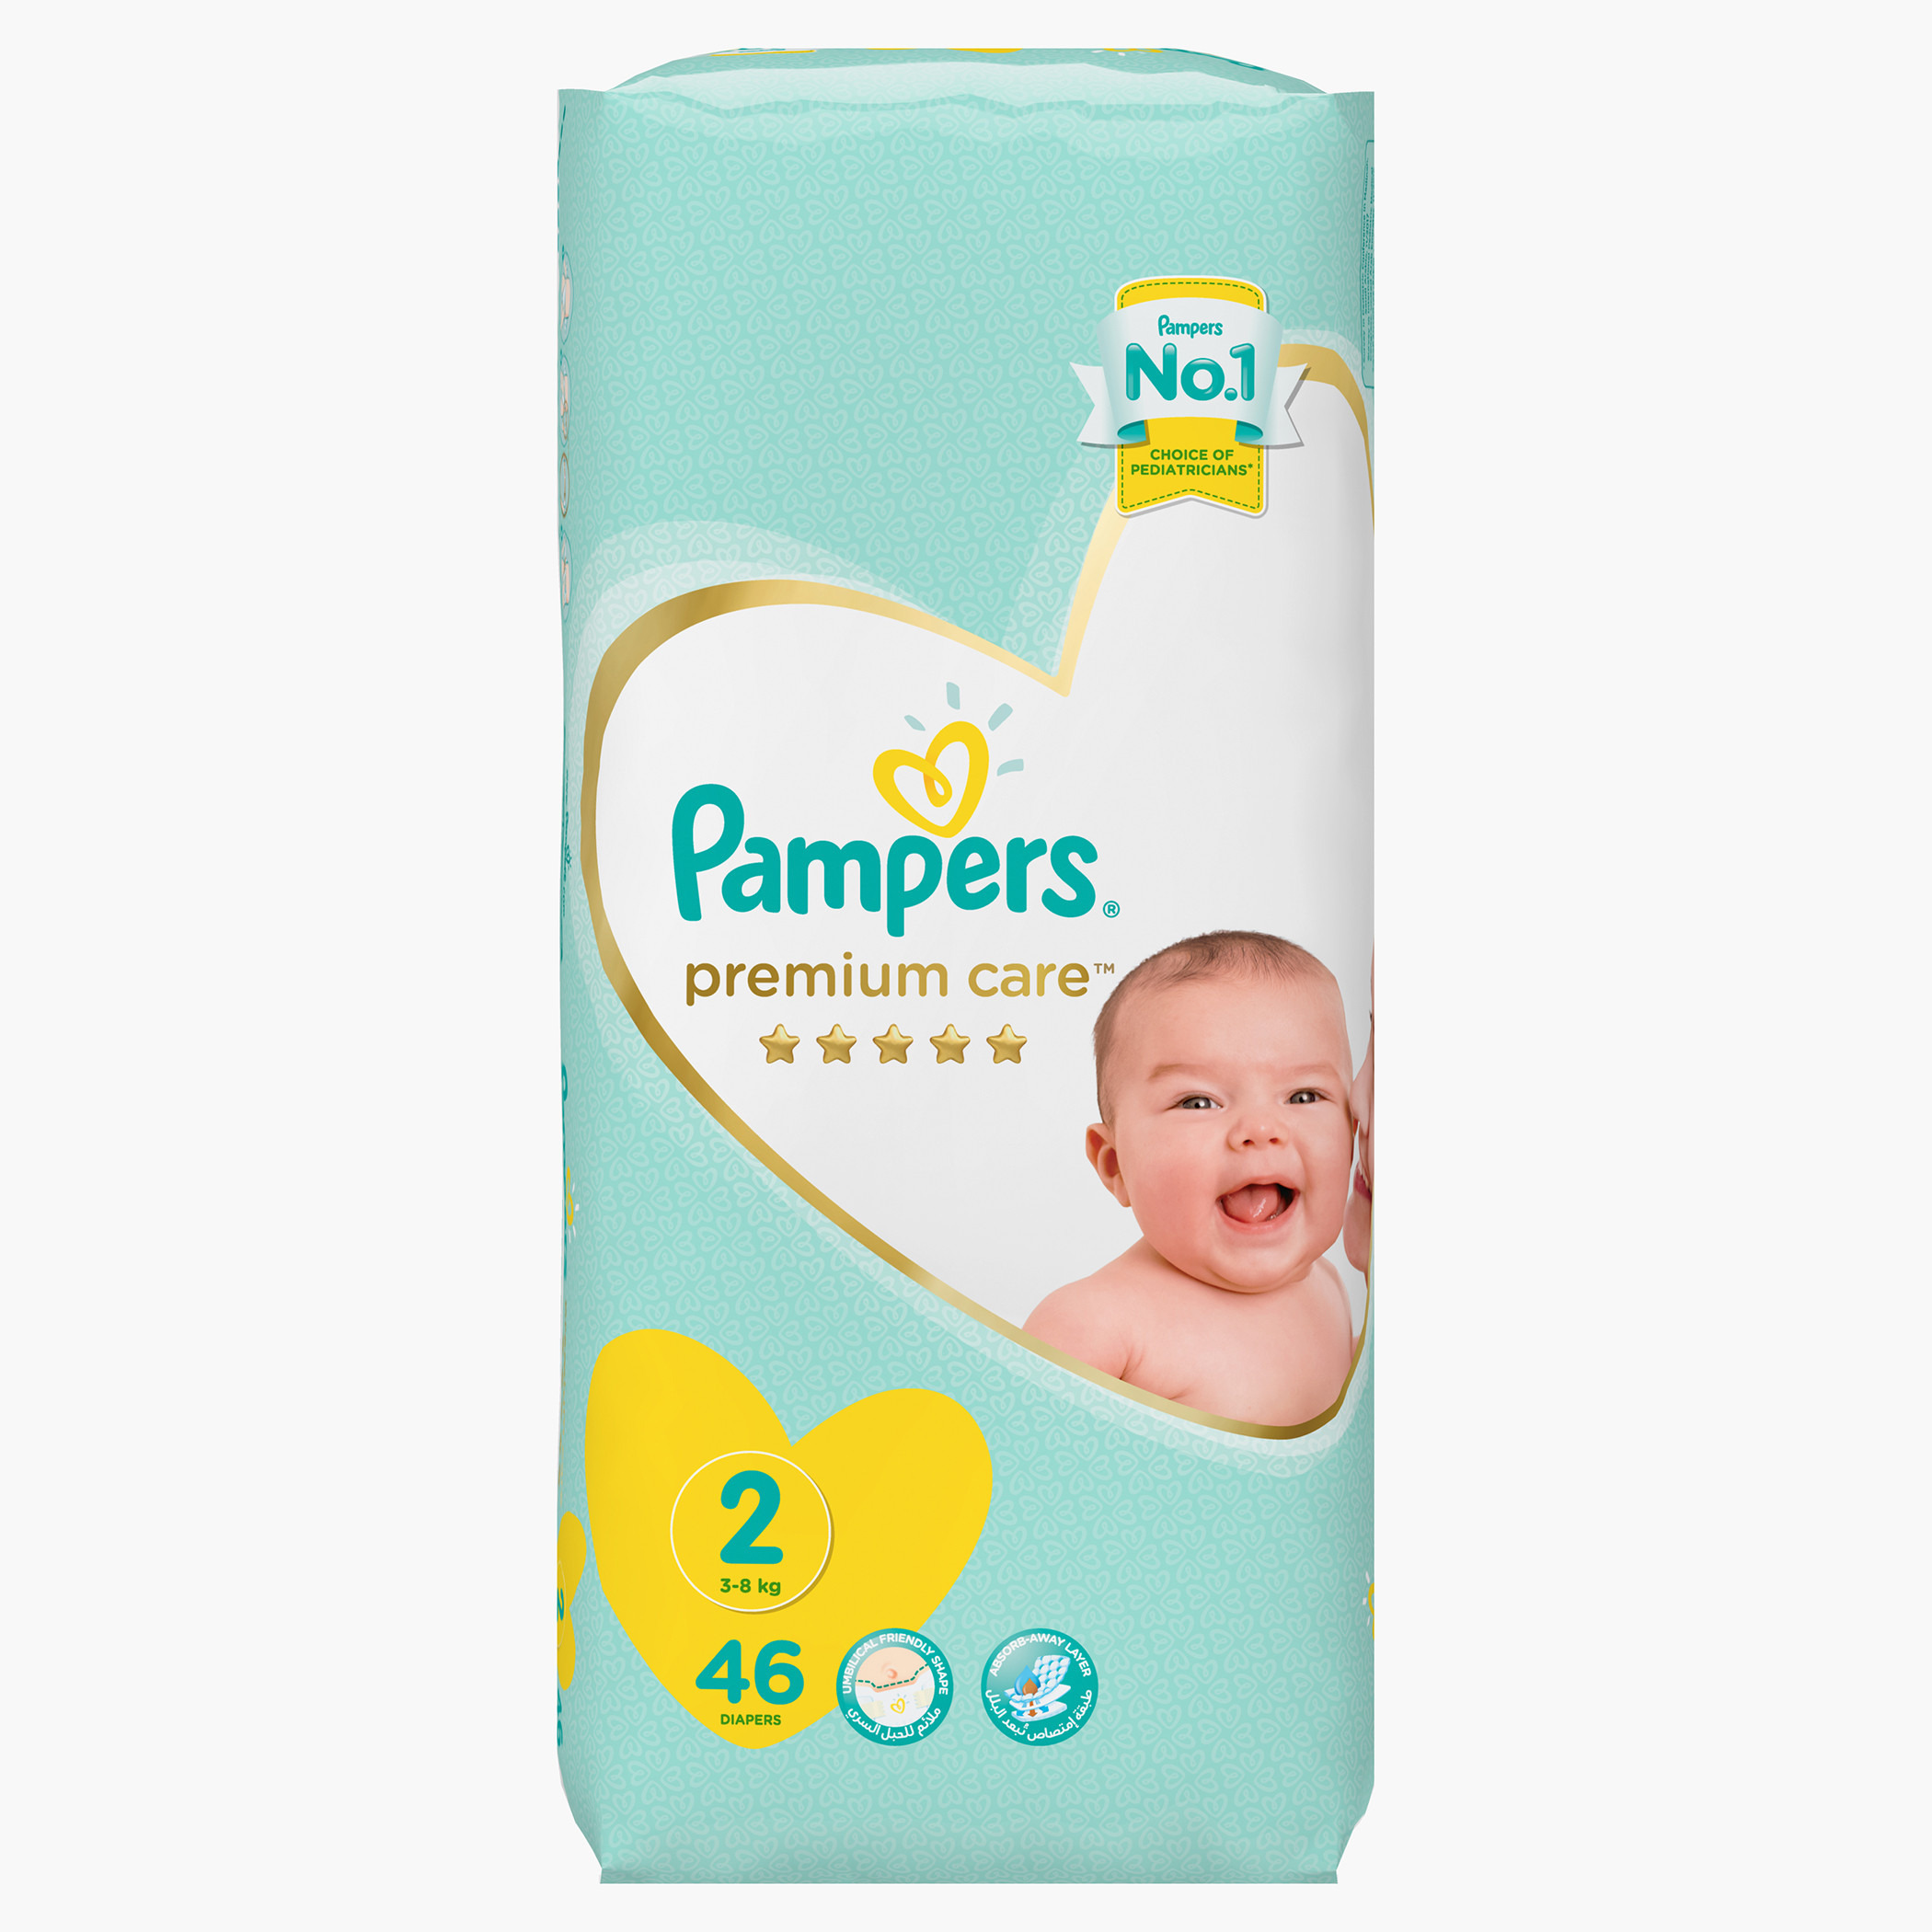 Buy Pampers All round Protection Pants, Small size baby Diapers, (S) 172  Count Lotion with Aloe Vera Online at Low Prices in India - Amazon.in